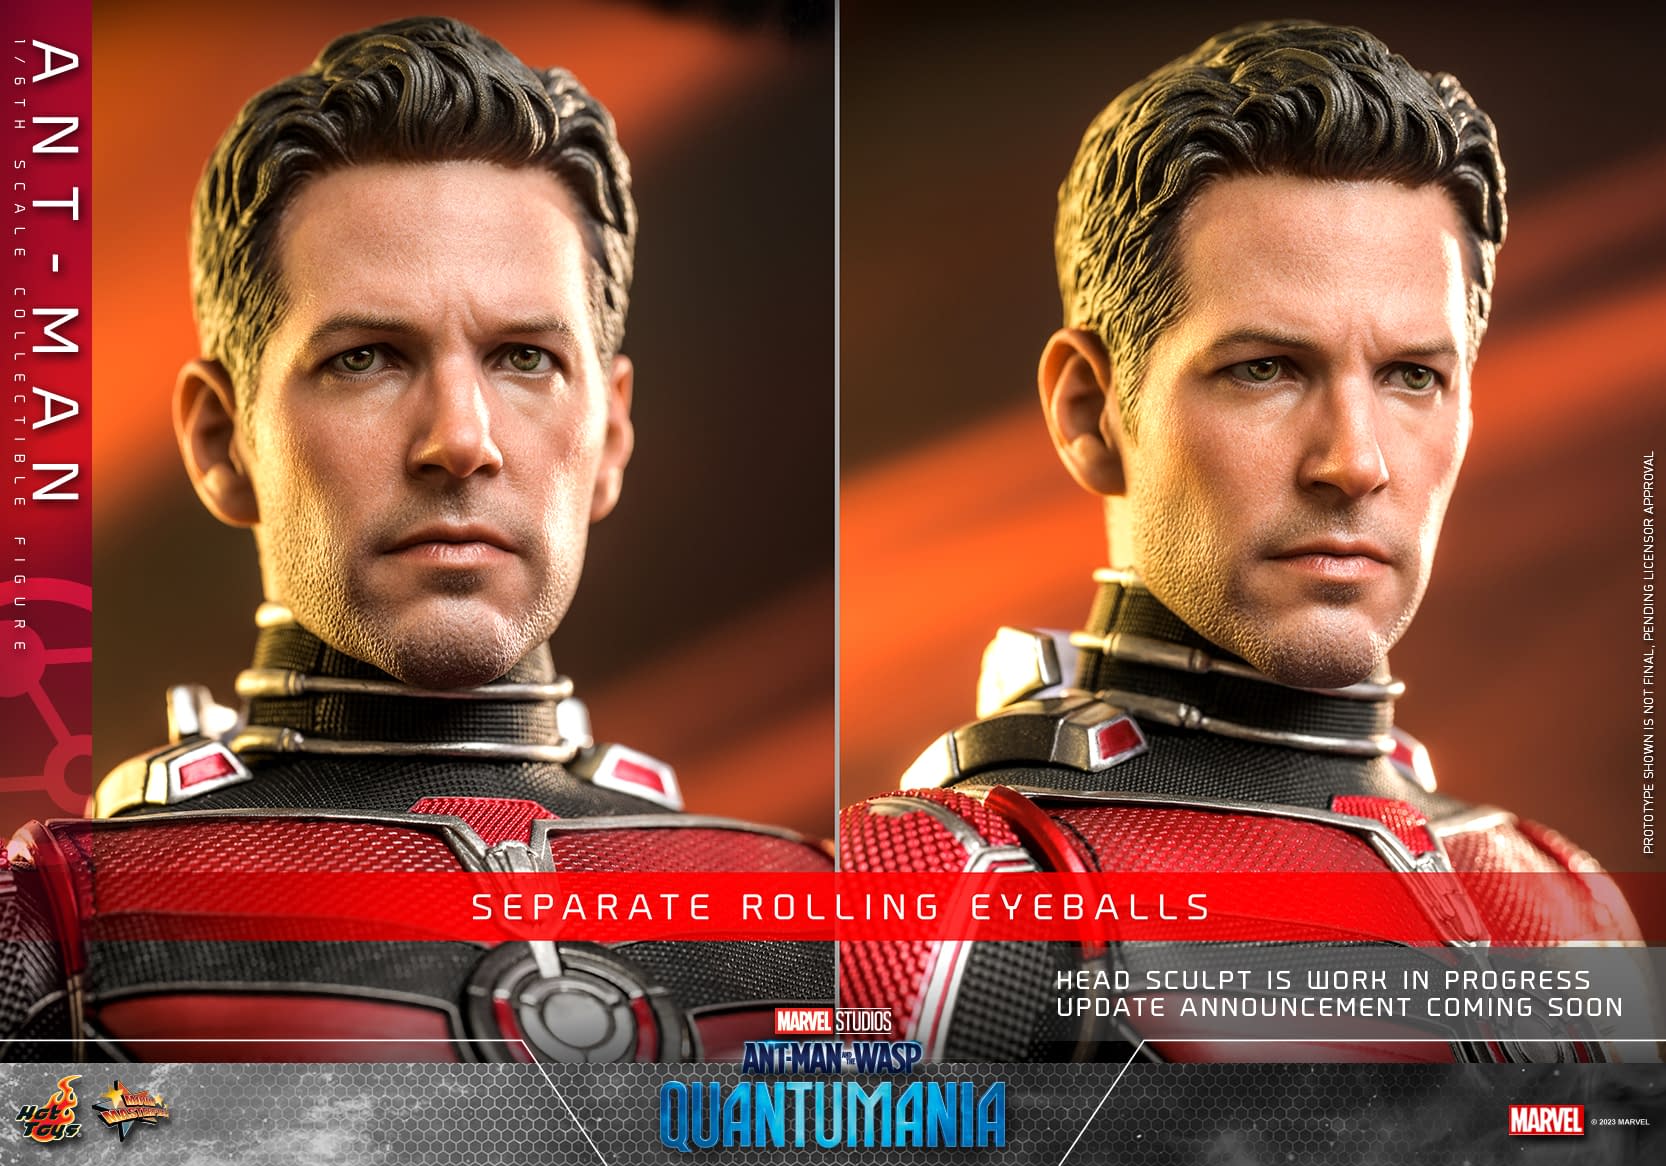 Hot Toys Enters the Quantum Realm with New MCU Ant-Man 1/6 Figure 